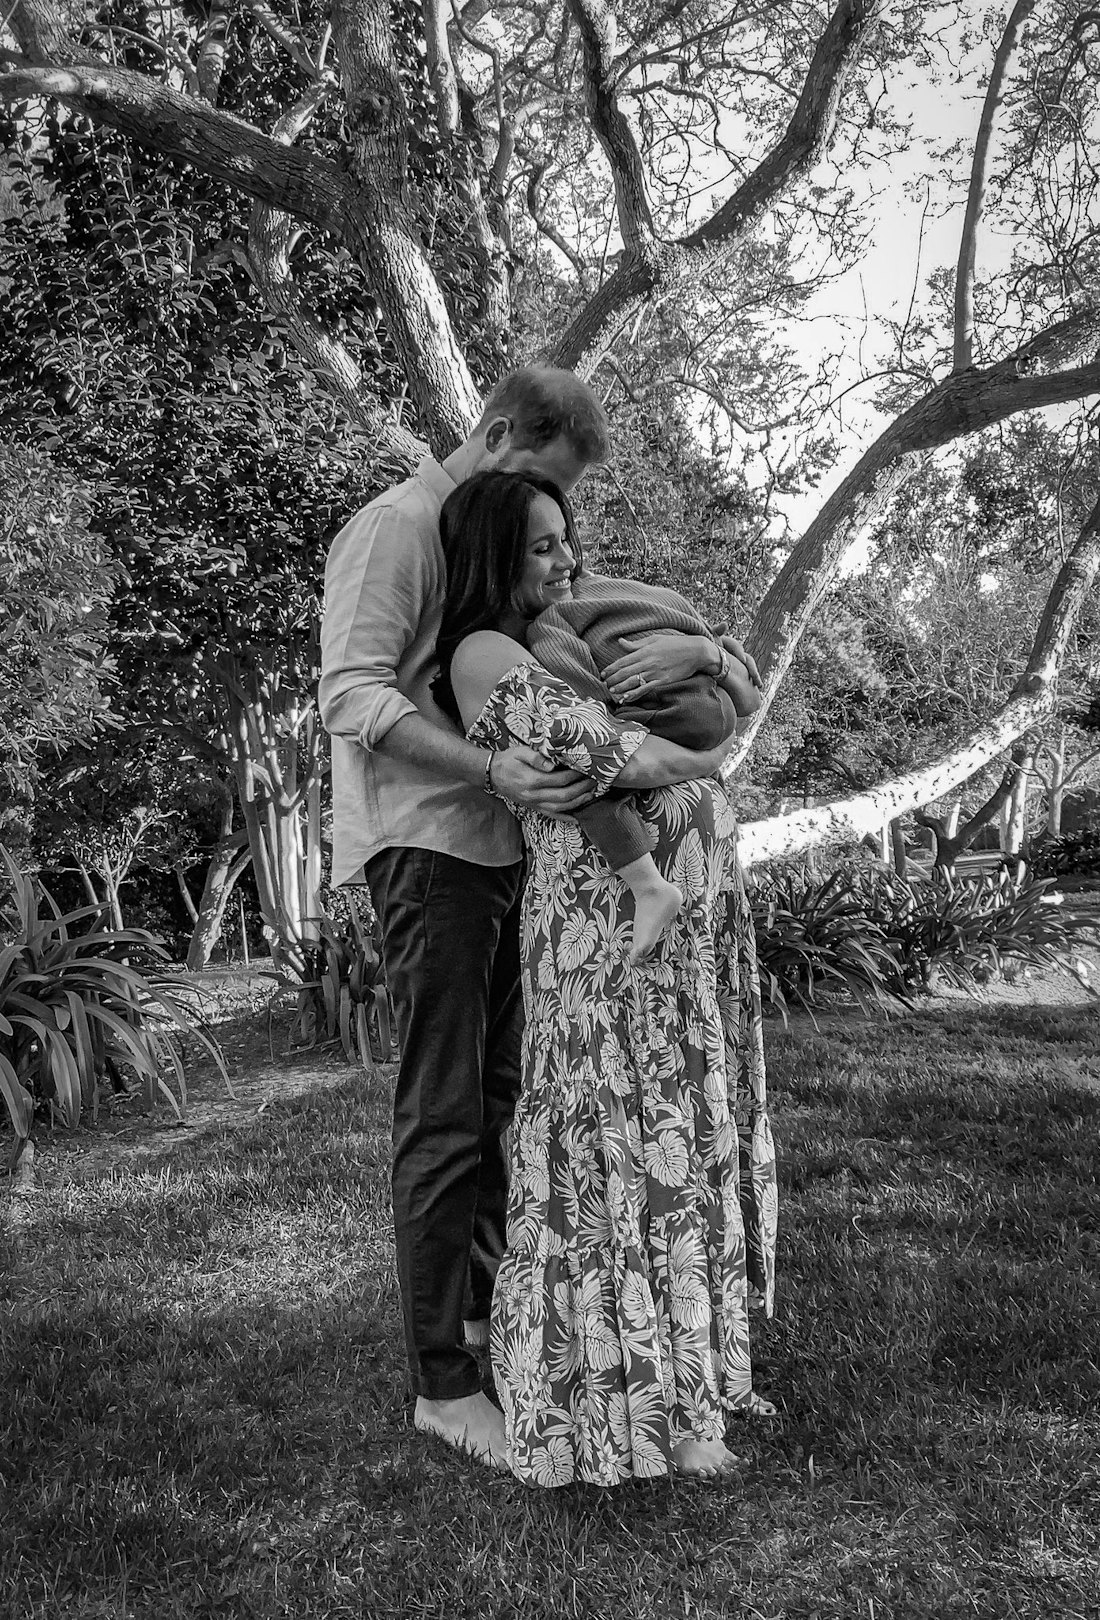 A friend of the Duke and Duchess of Sussex, Misan Harriman captured photo of Meghan Markle pregnant ...